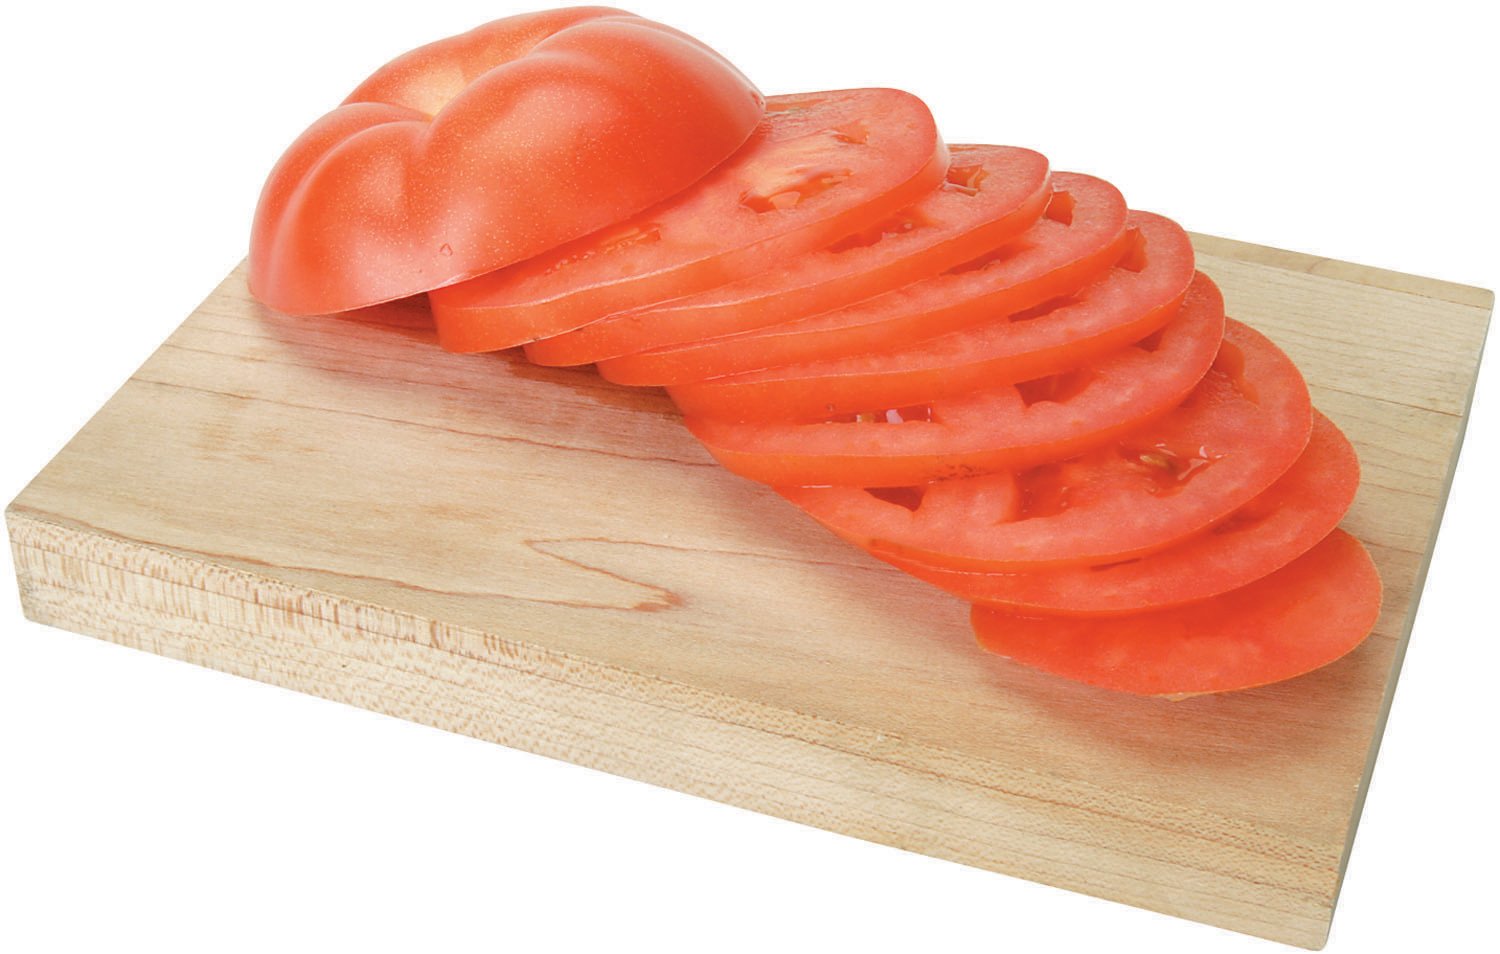 Tomato Slices on Wooden Board Food Picture